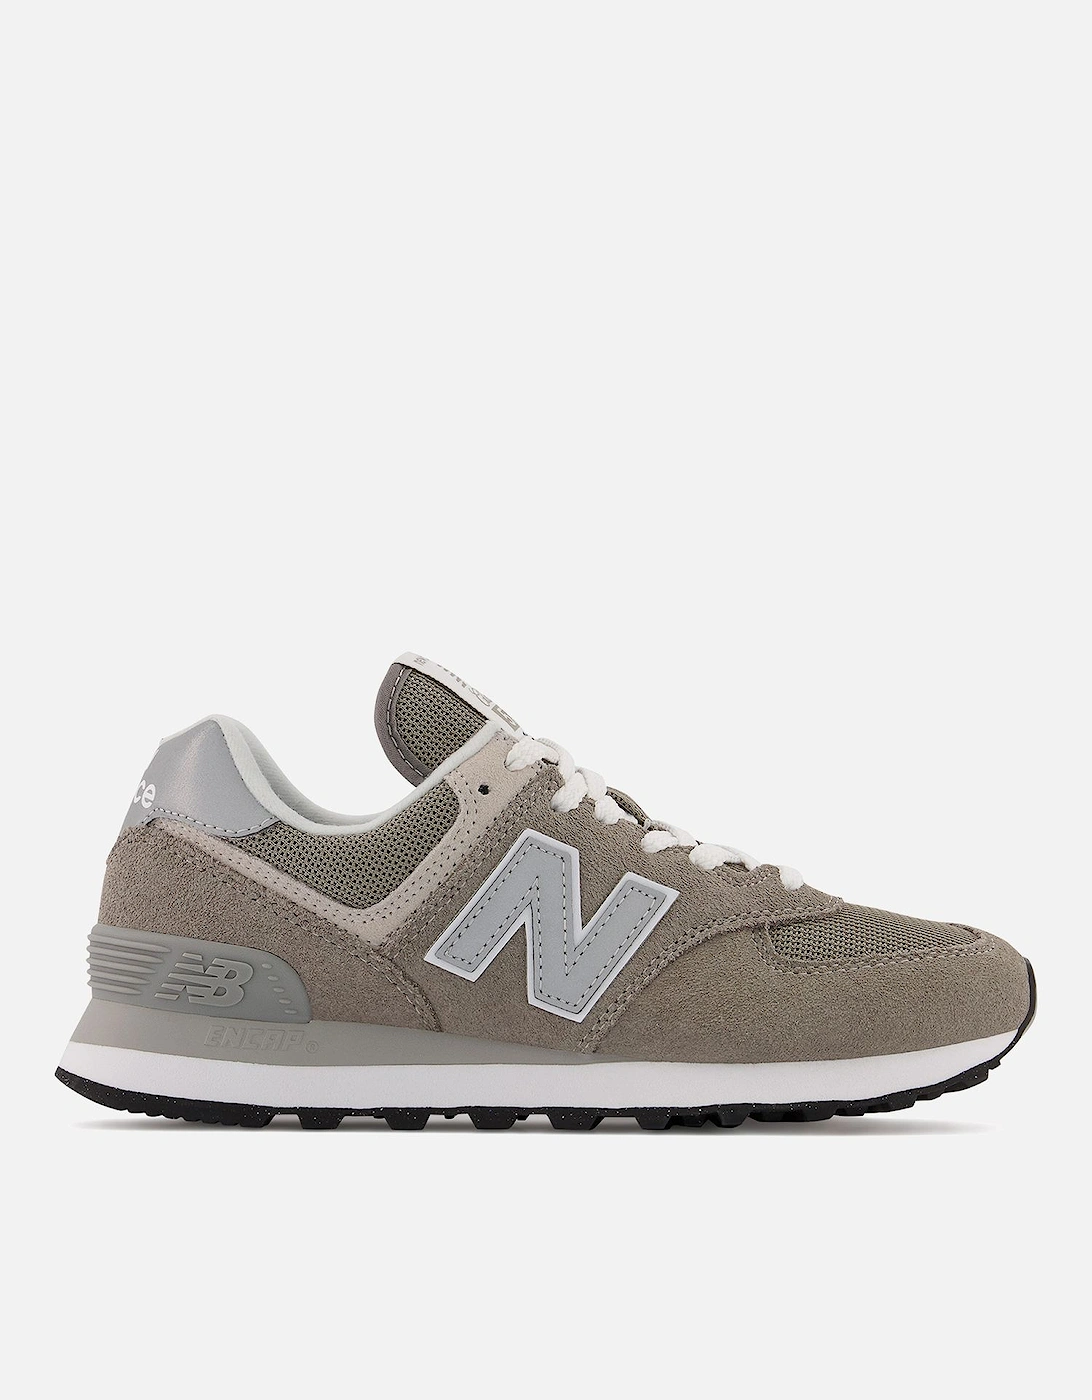 New Balance Women's 574 Evergreen Pack Trainers - Grey - New Balance - Home - New Balance Women's 574 Evergreen Pack Trainers - Grey, 2 of 1